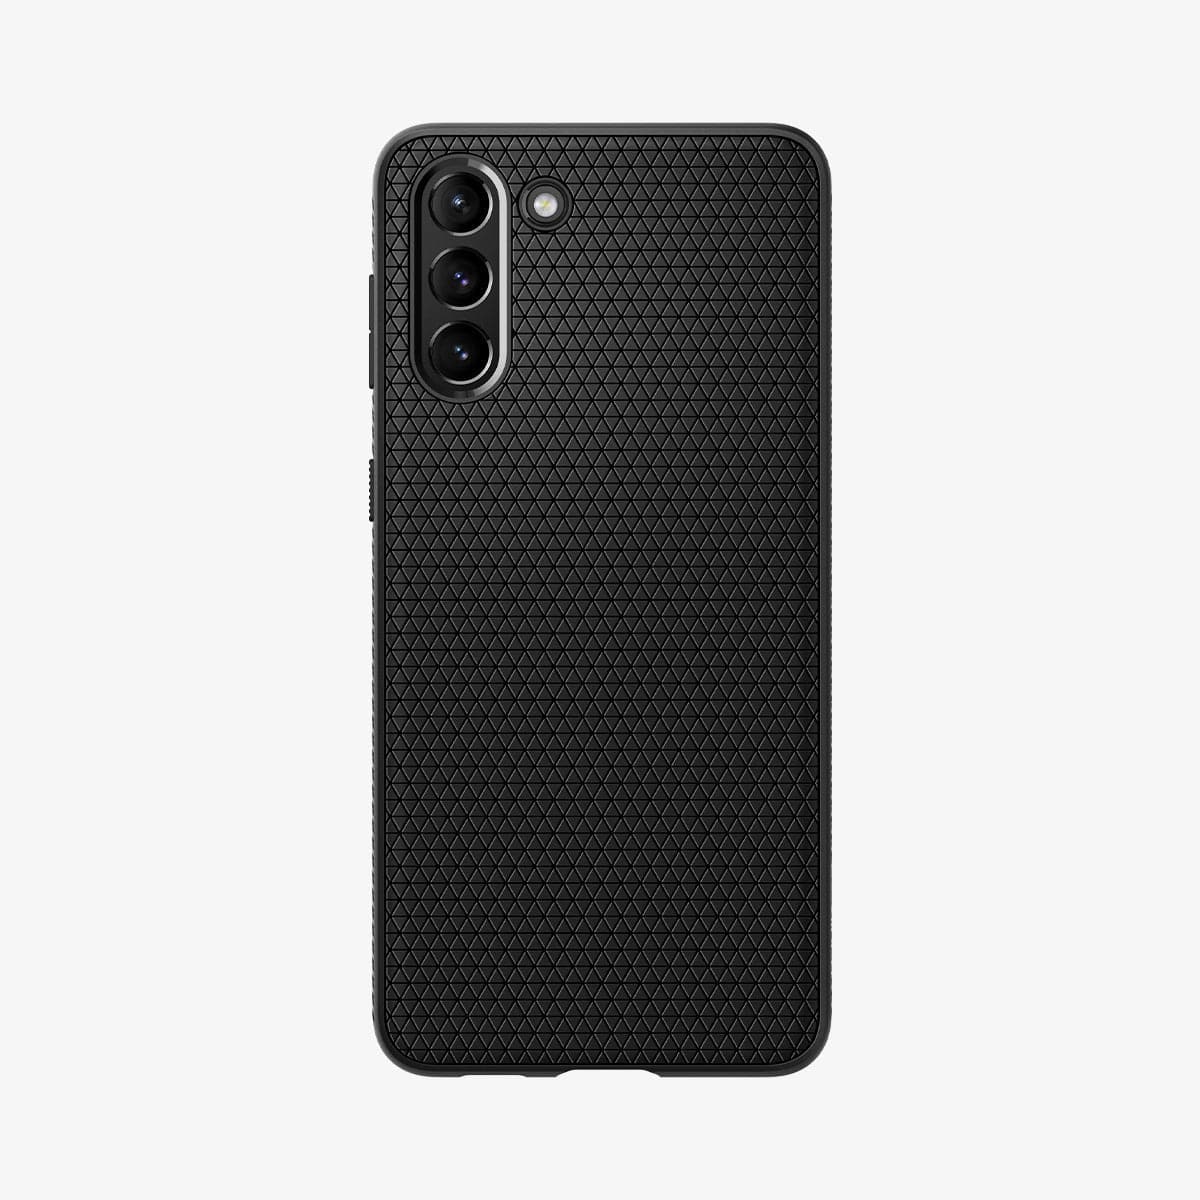 ACS02422 - Galaxy S21 Liquid Air Case in matte black showing the back